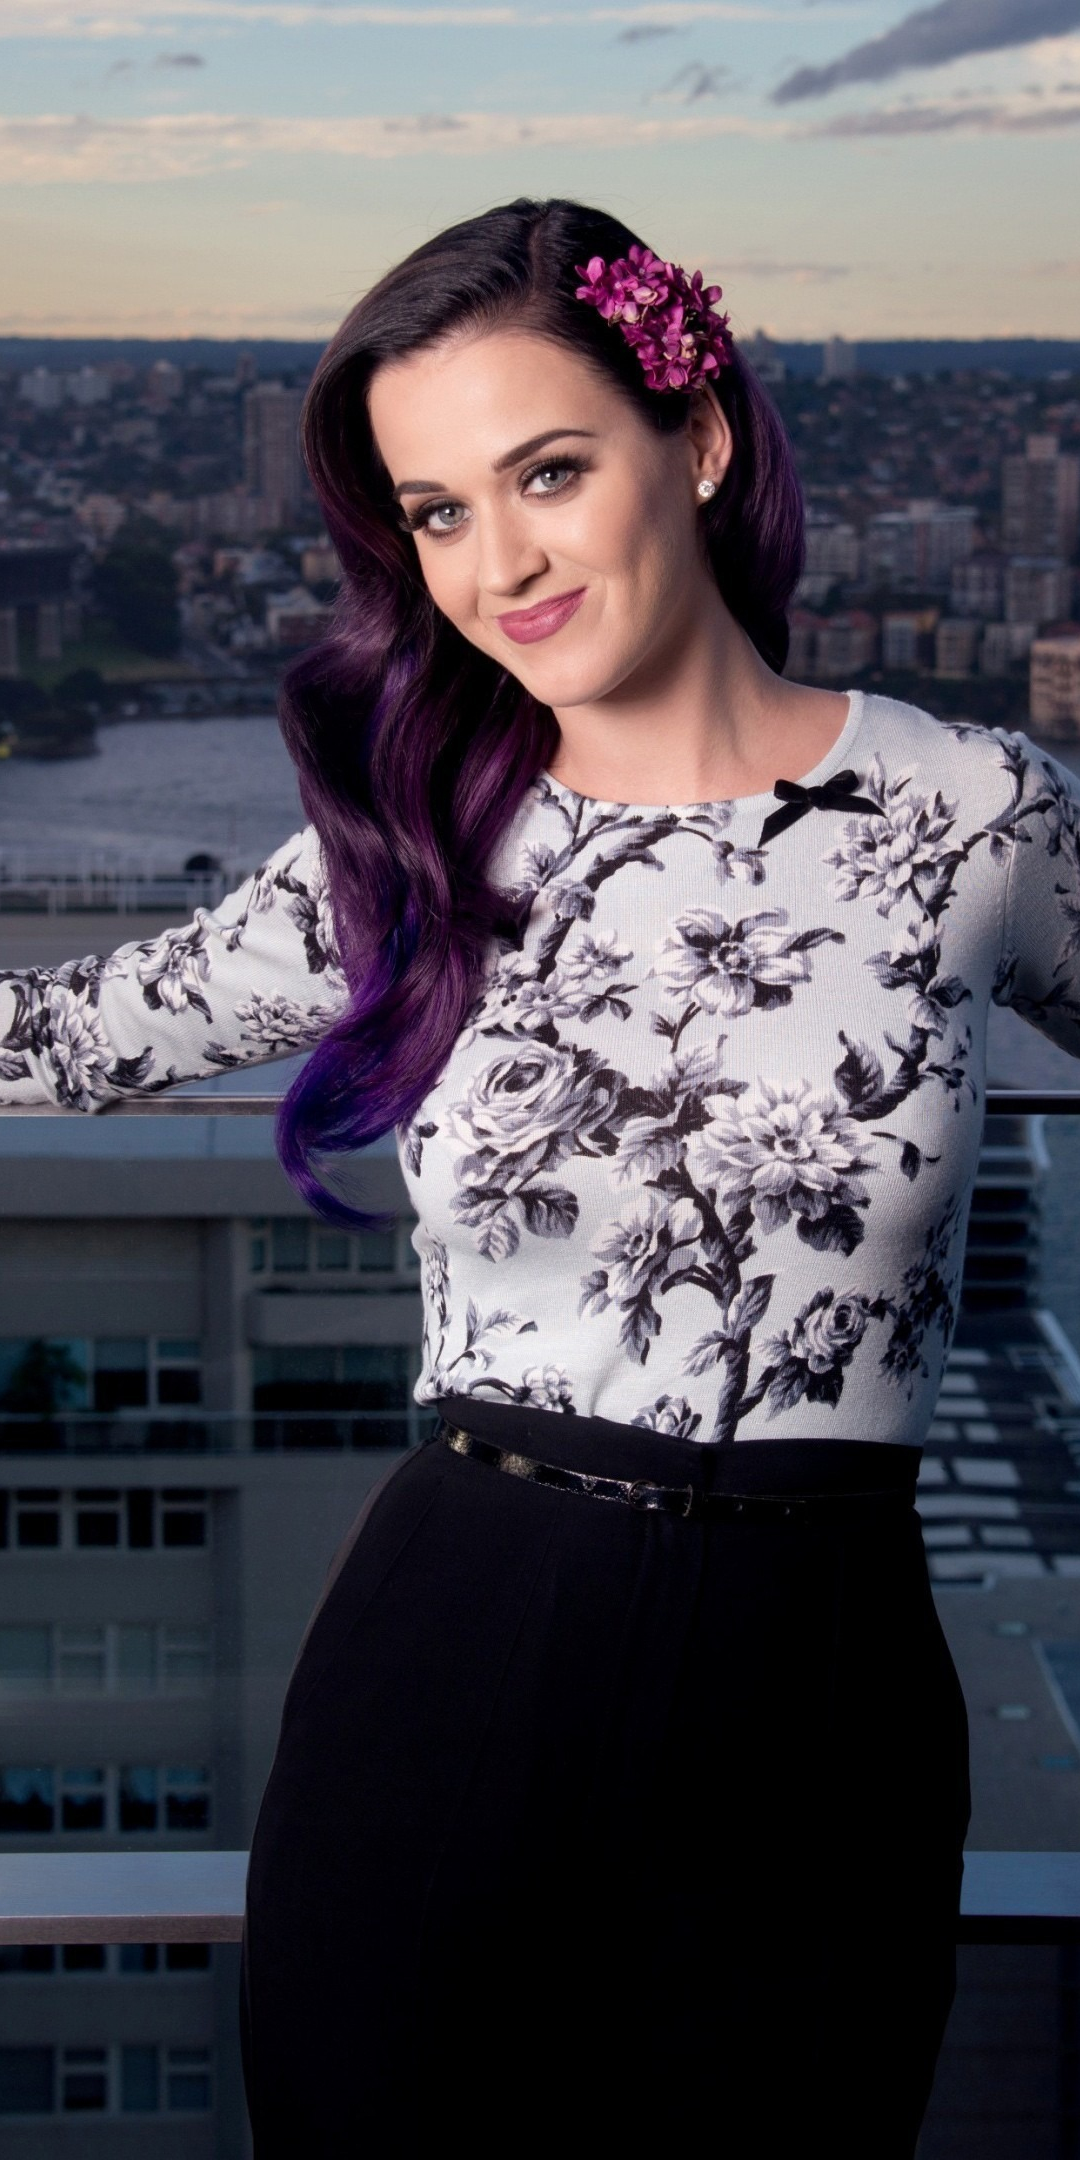 Colored hair, smile, katy perry, singer, 1080x2160 wallpaper